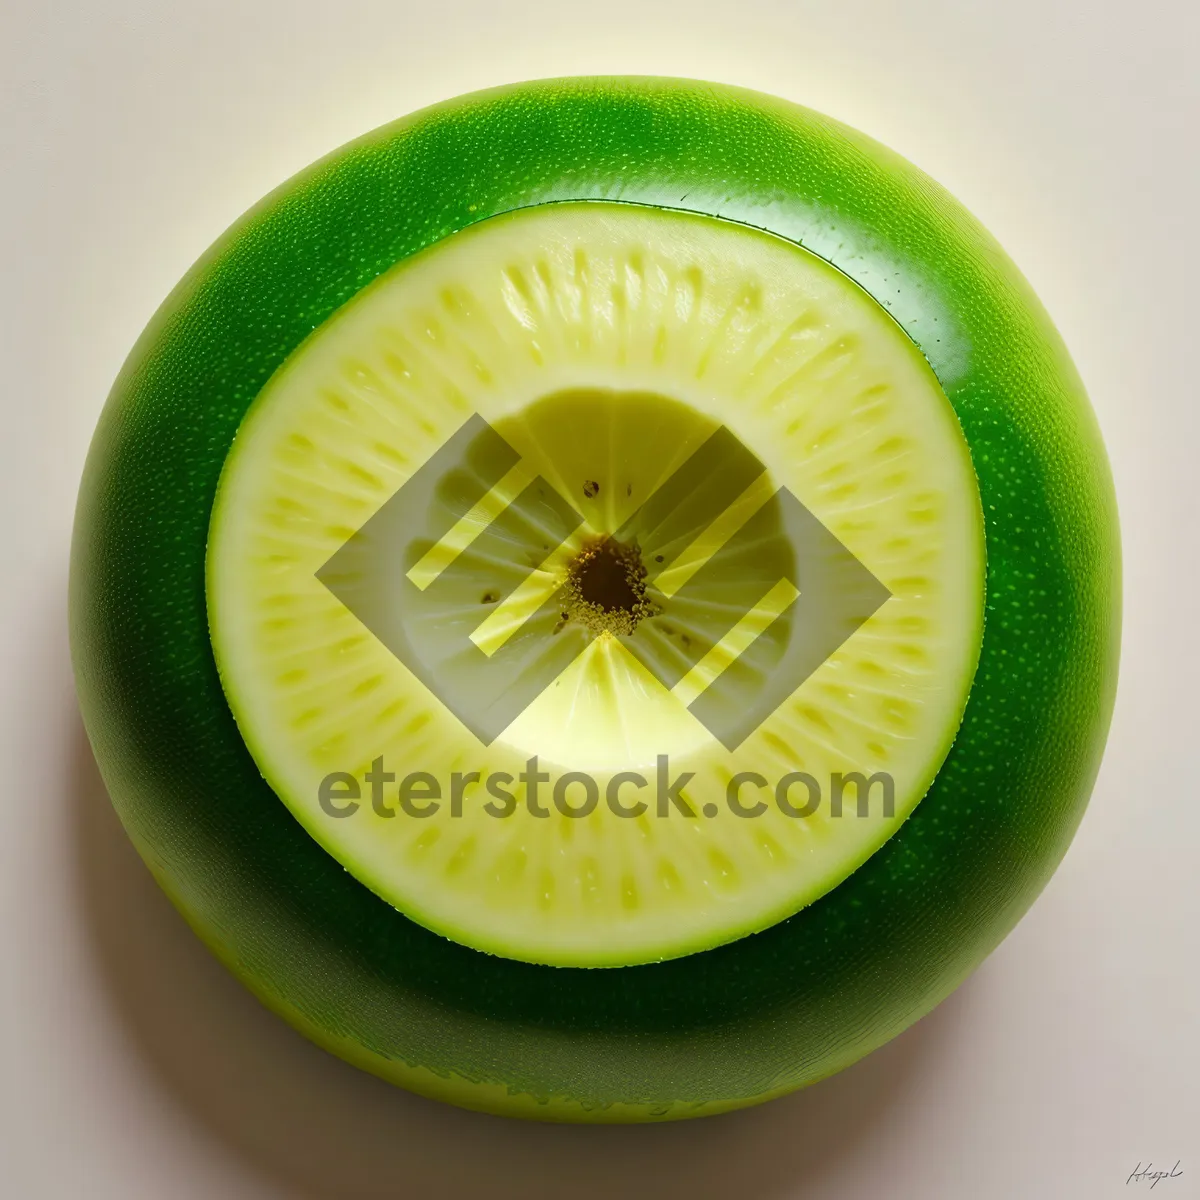 Picture of Juicy Citrus Fruit Slice: Refreshingly Healthy and Delicious